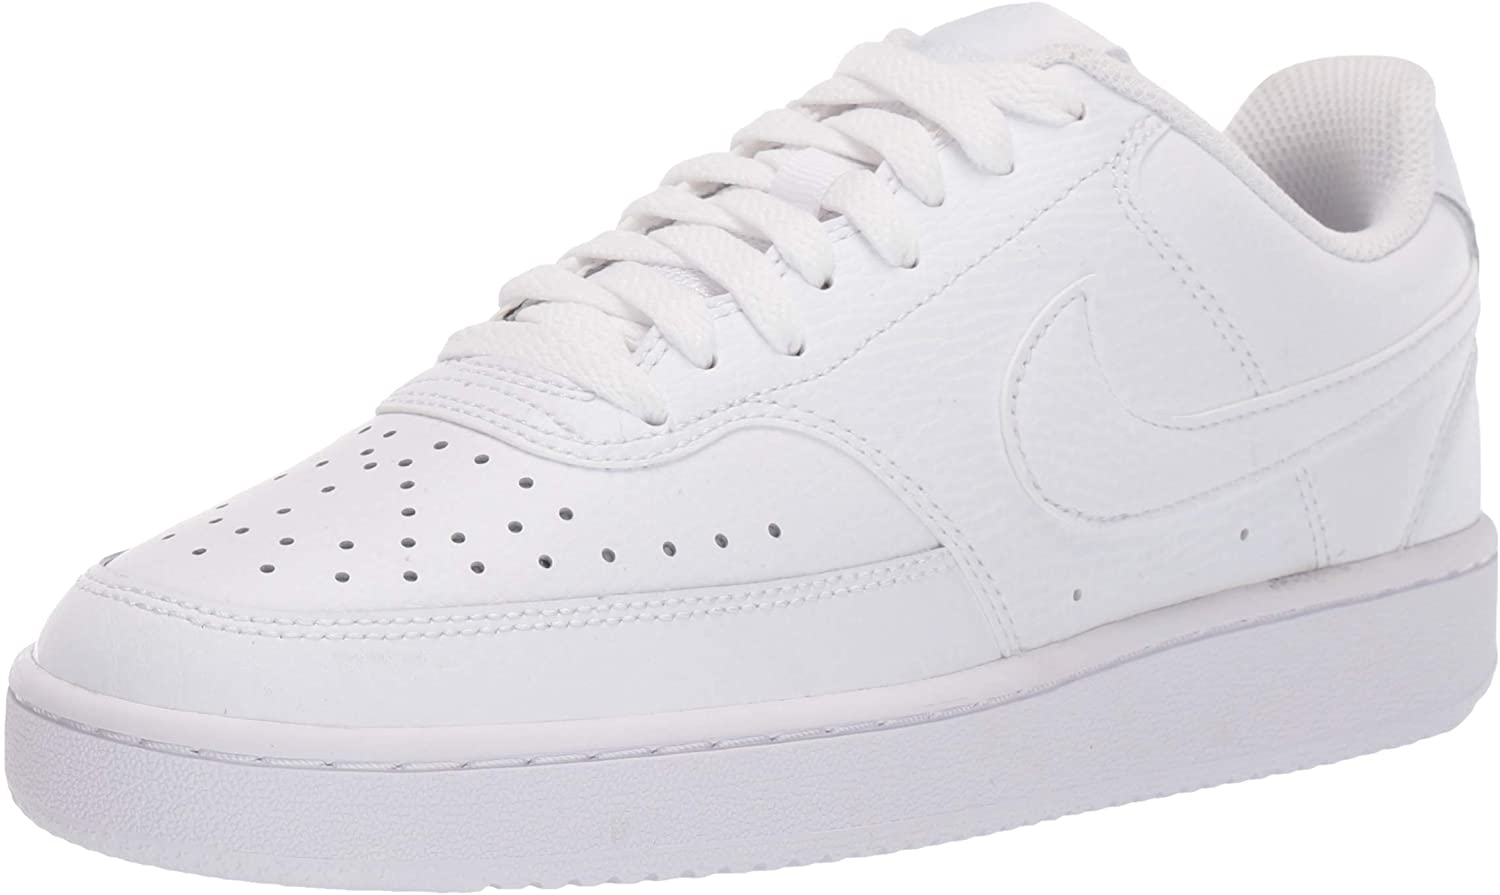 Chaussure basse Nike Court Vision pour femme